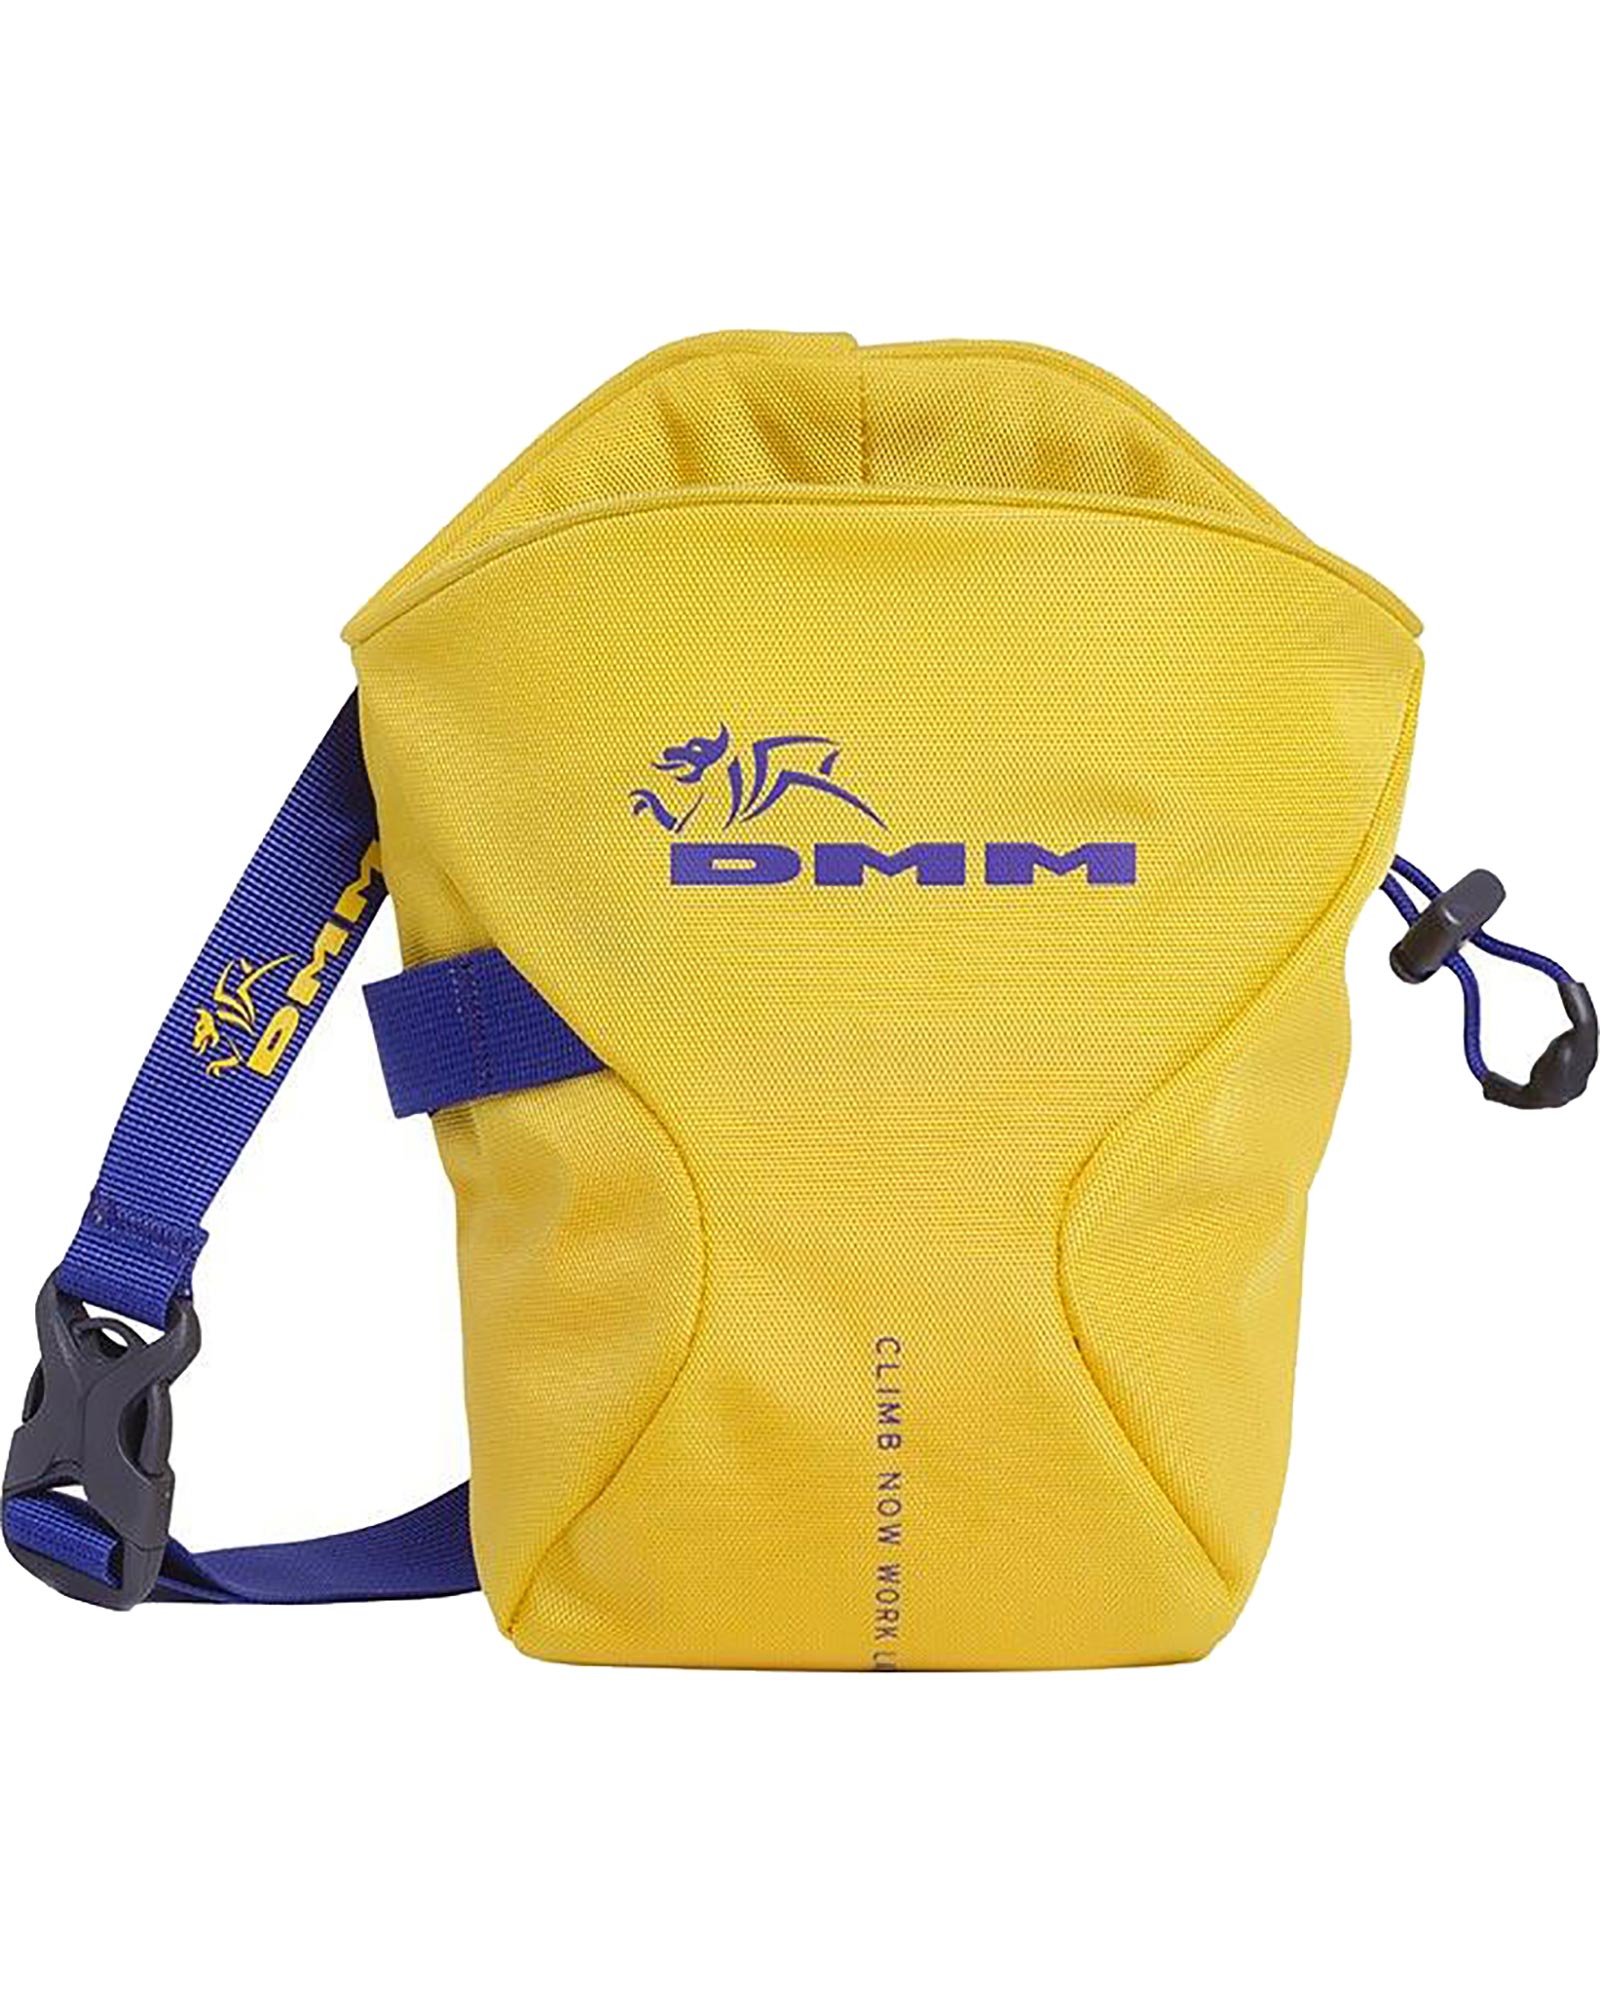 DMM Traction Chalk Bag - Yellow